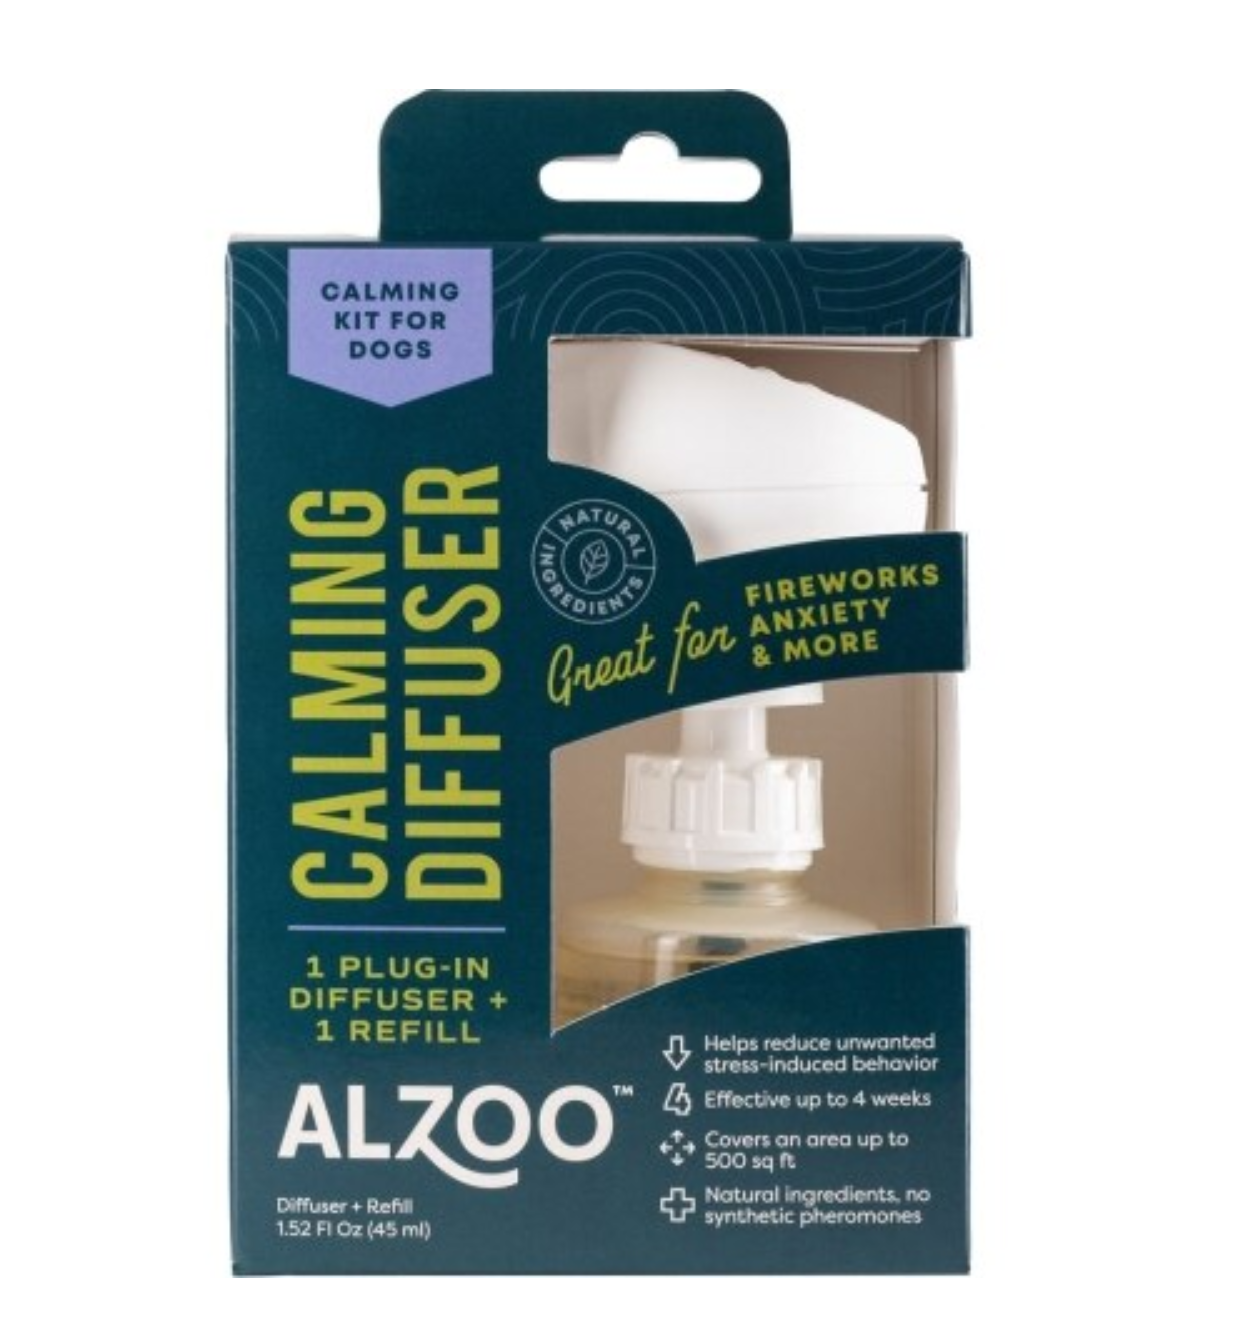 Alzoo Plant Based Calming Diffuser for Dogs